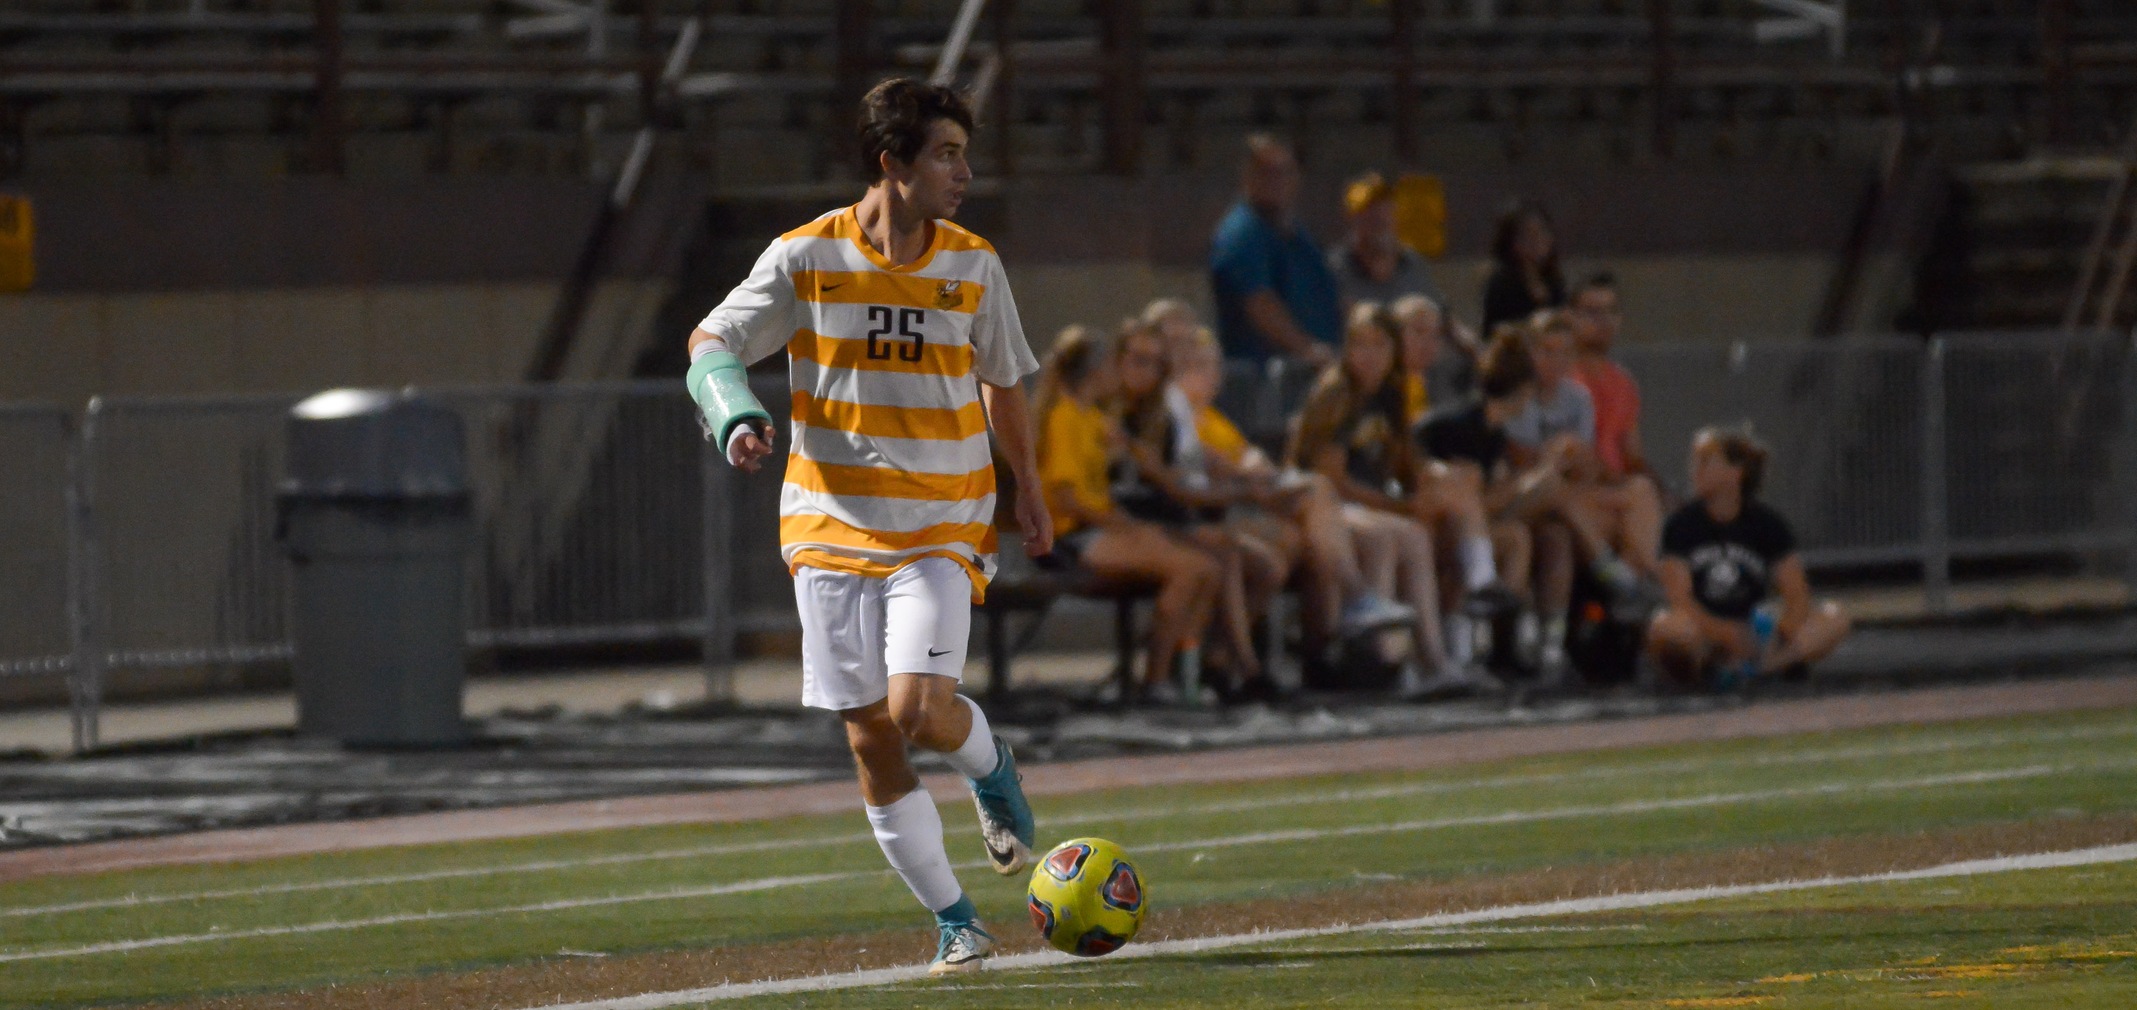 Junior All-OAC forward Danny Ruple scored both BW goals in a 3-2 loss to Houghton (N.Y.)